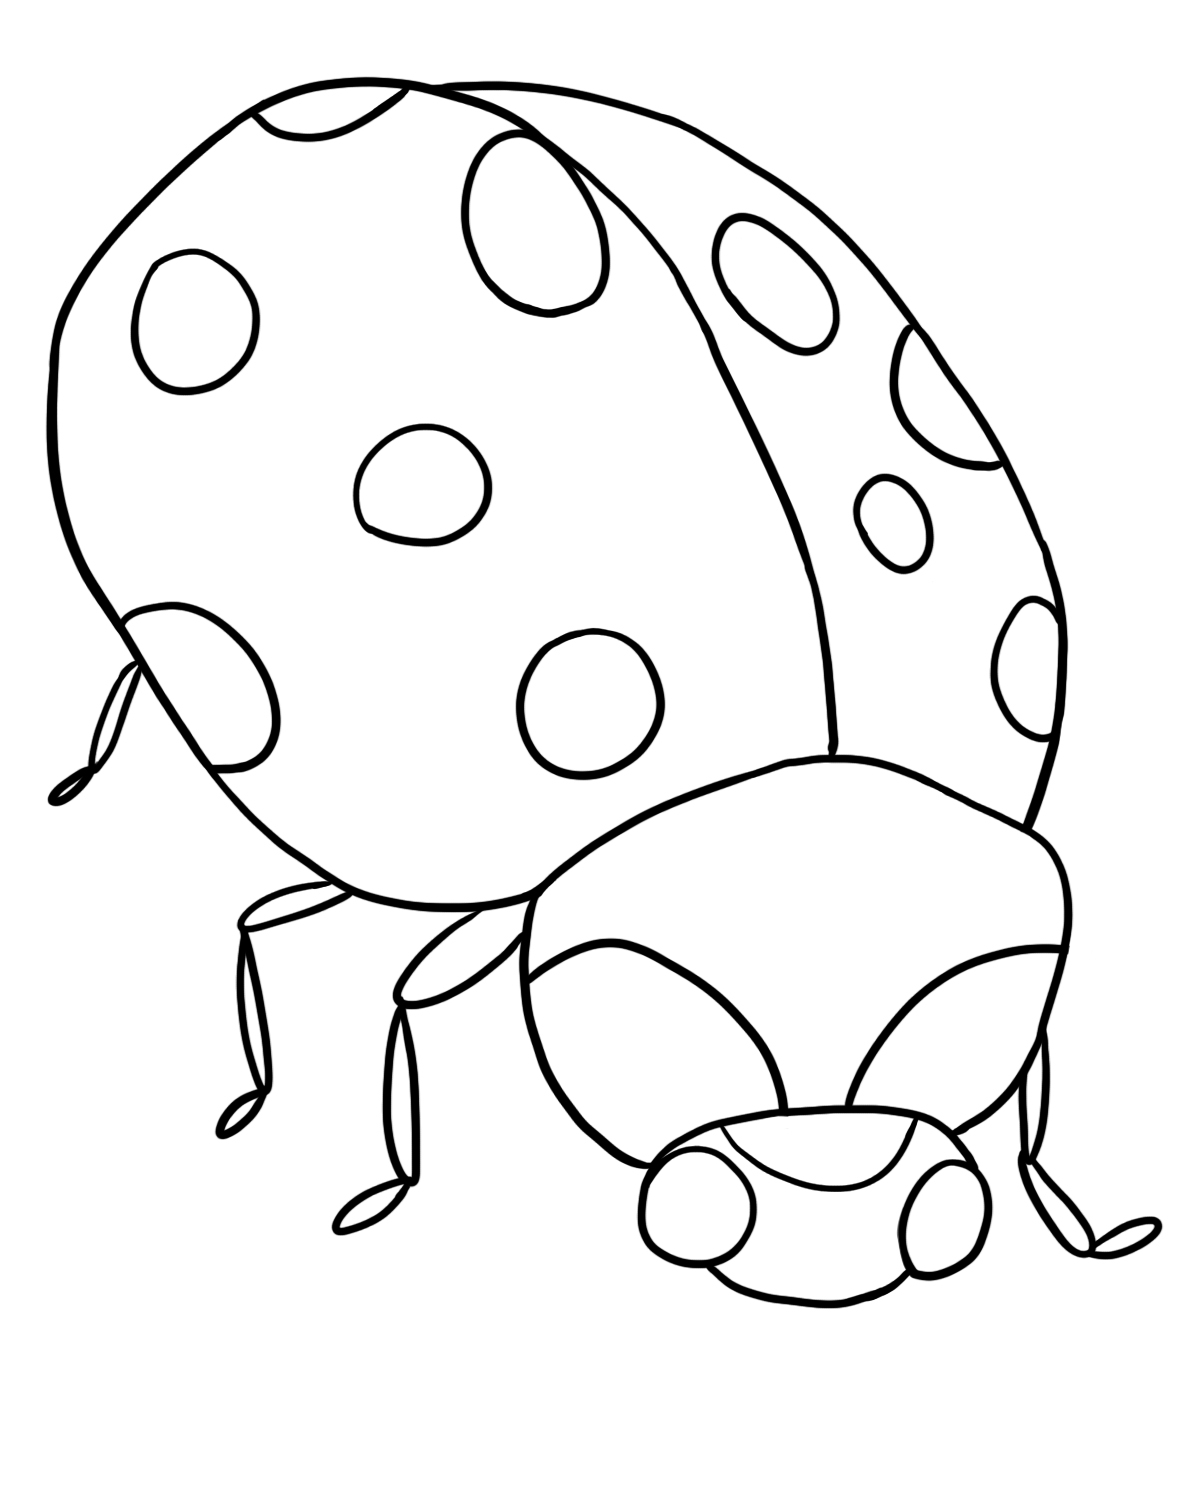 bowling pin coloring pages id 9008 : Uncategorized - yoand.